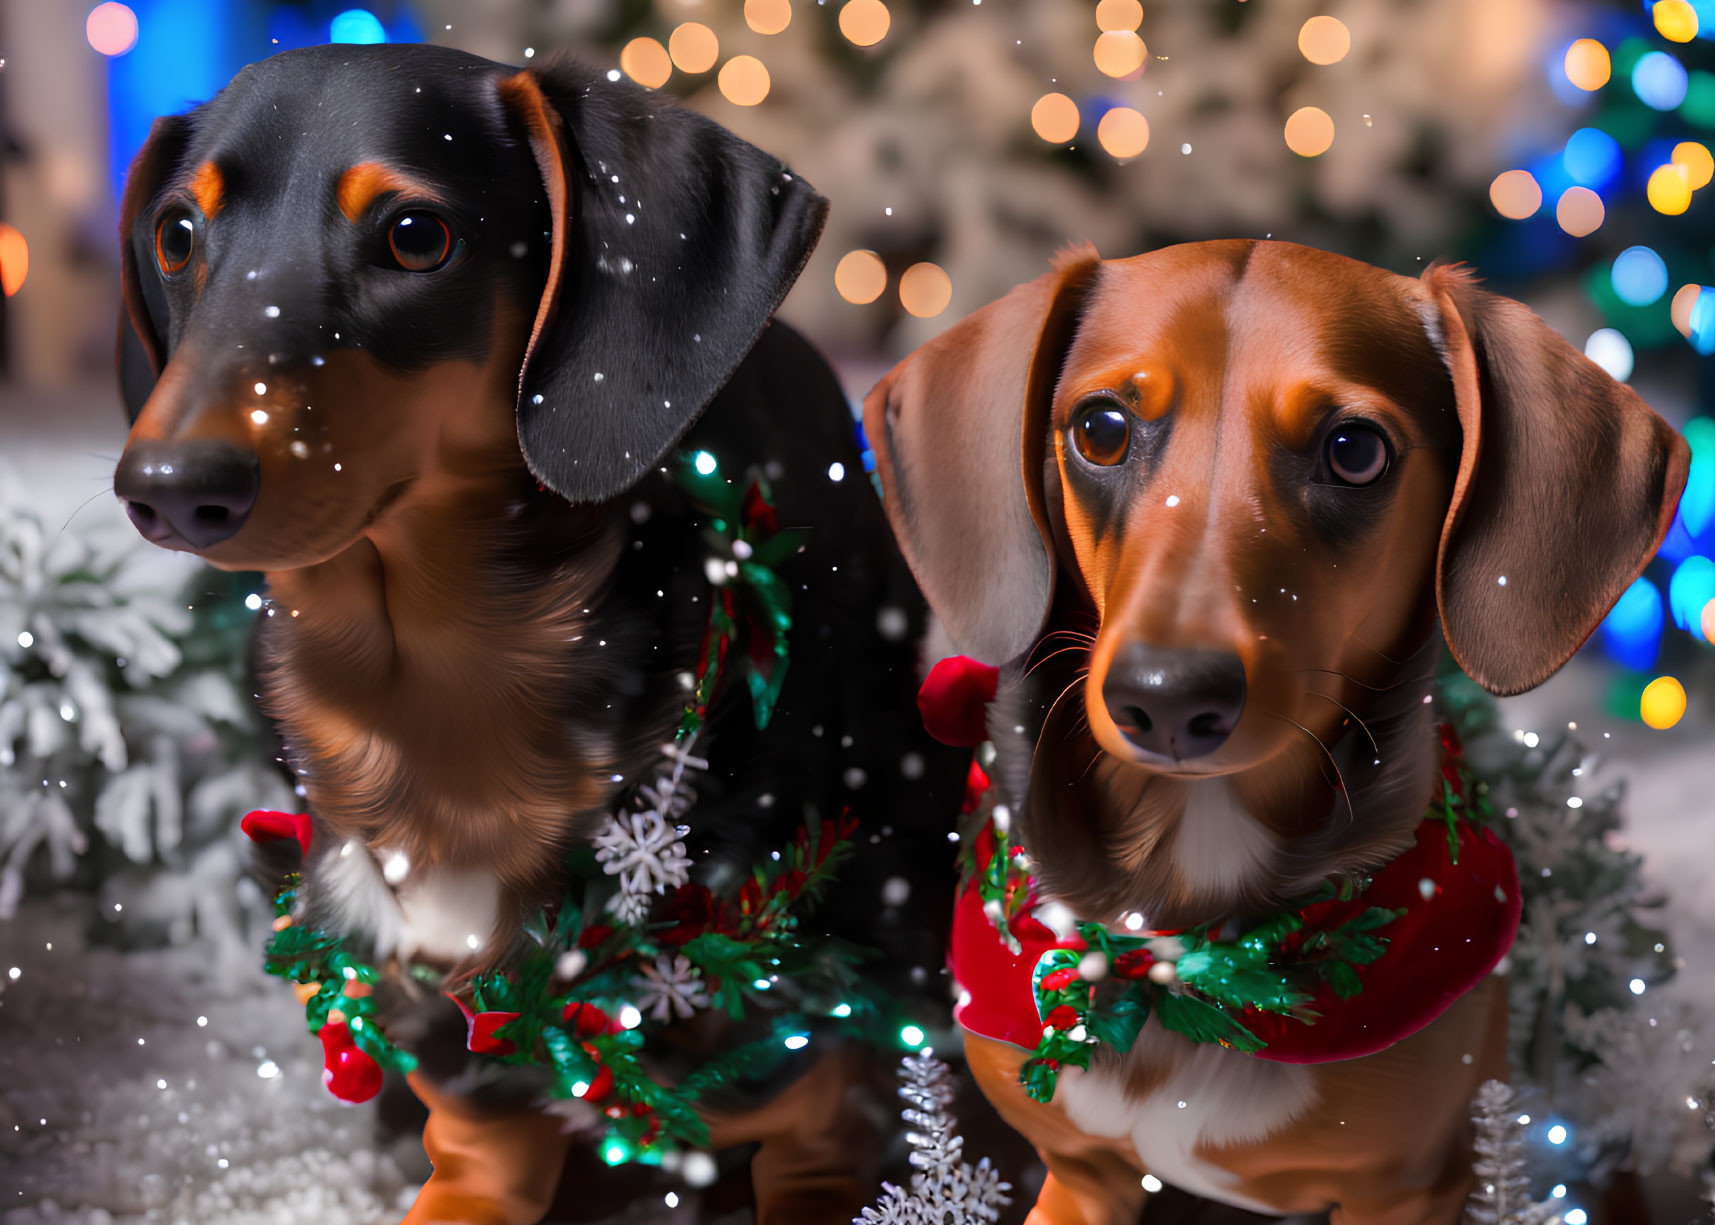 Festive dachshunds with Christmas collars in snowy scene